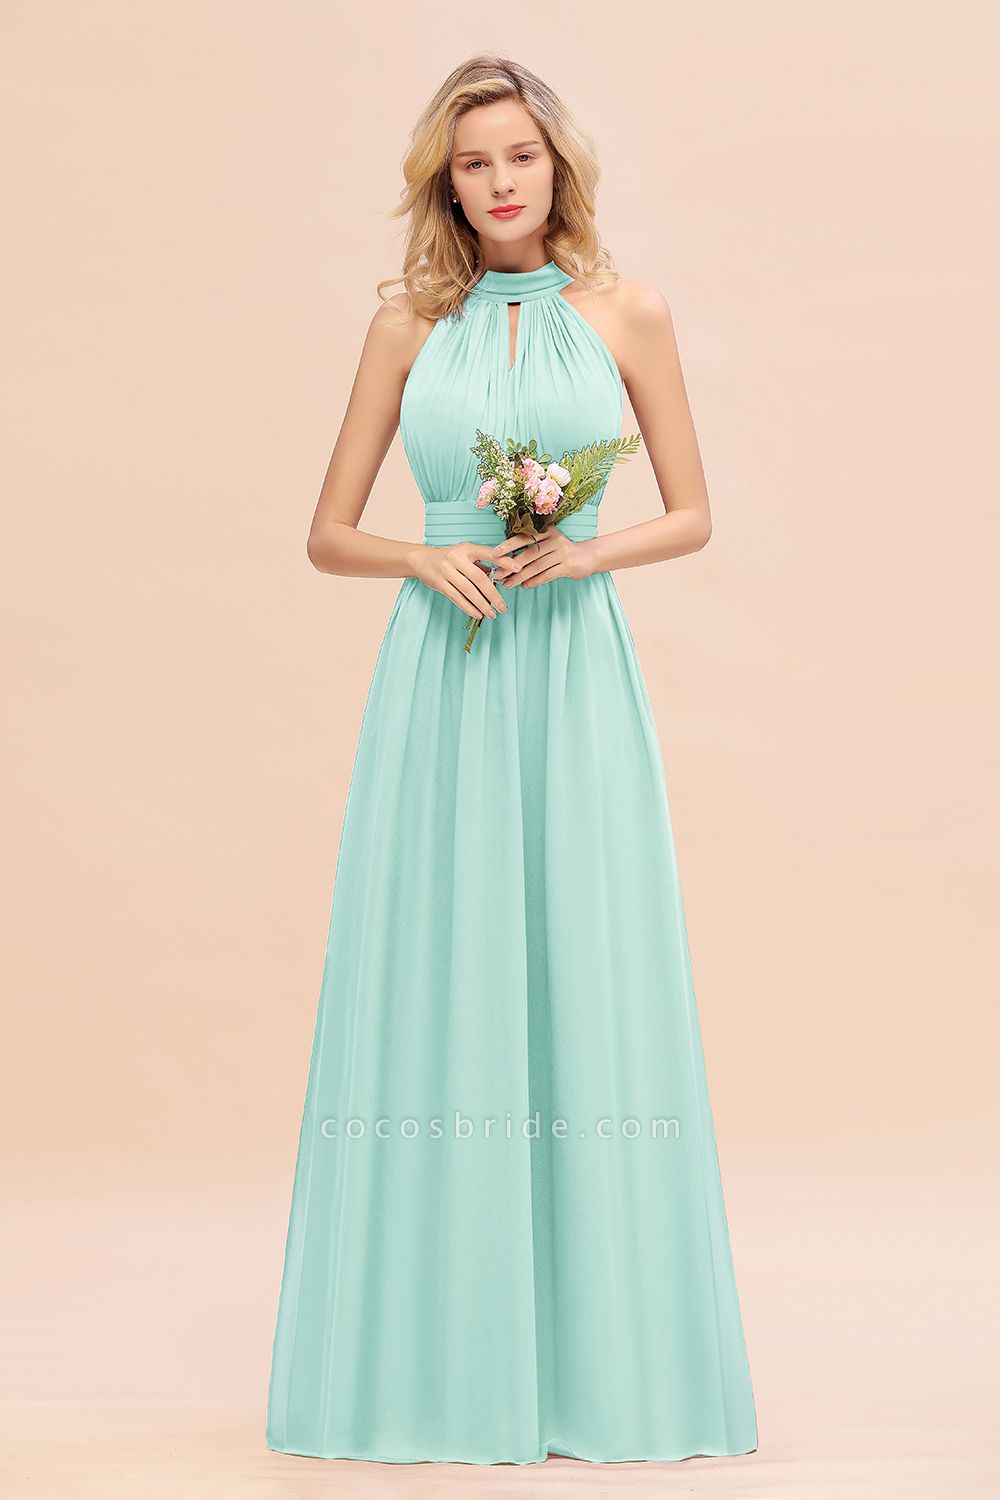 BM0758 Glamorous High-Neck Halter Bridesmaid Affordable Dresses with Ruffle